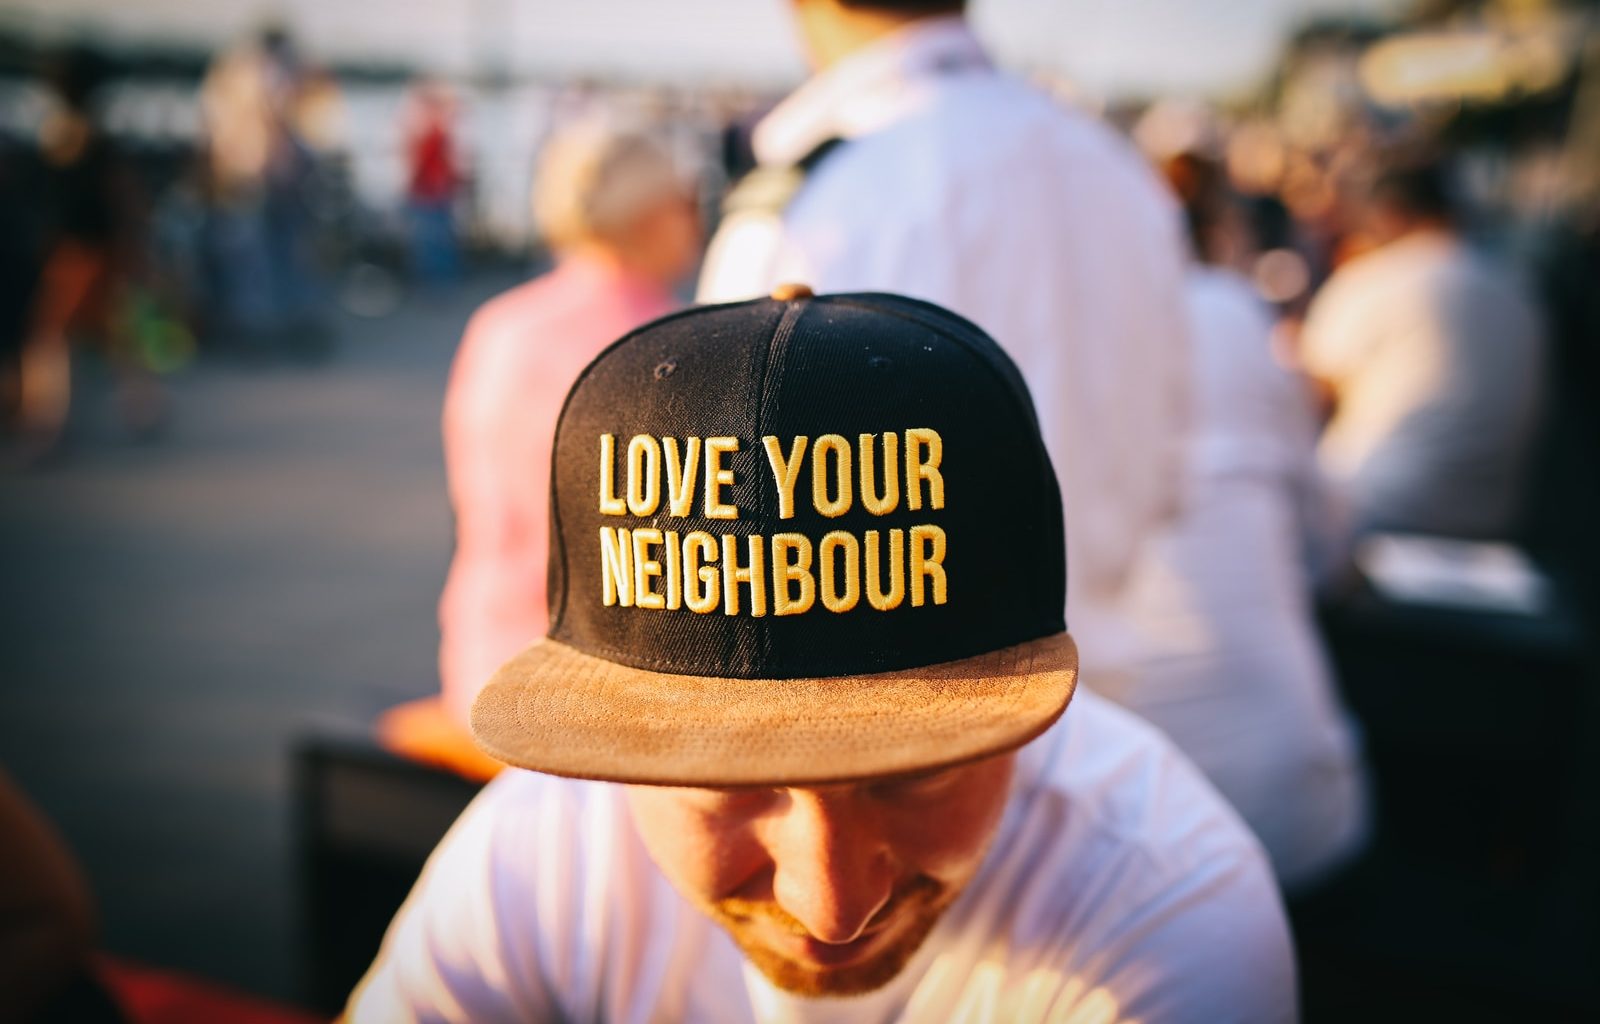 man wearing black cap with love your neighbour print during daytime